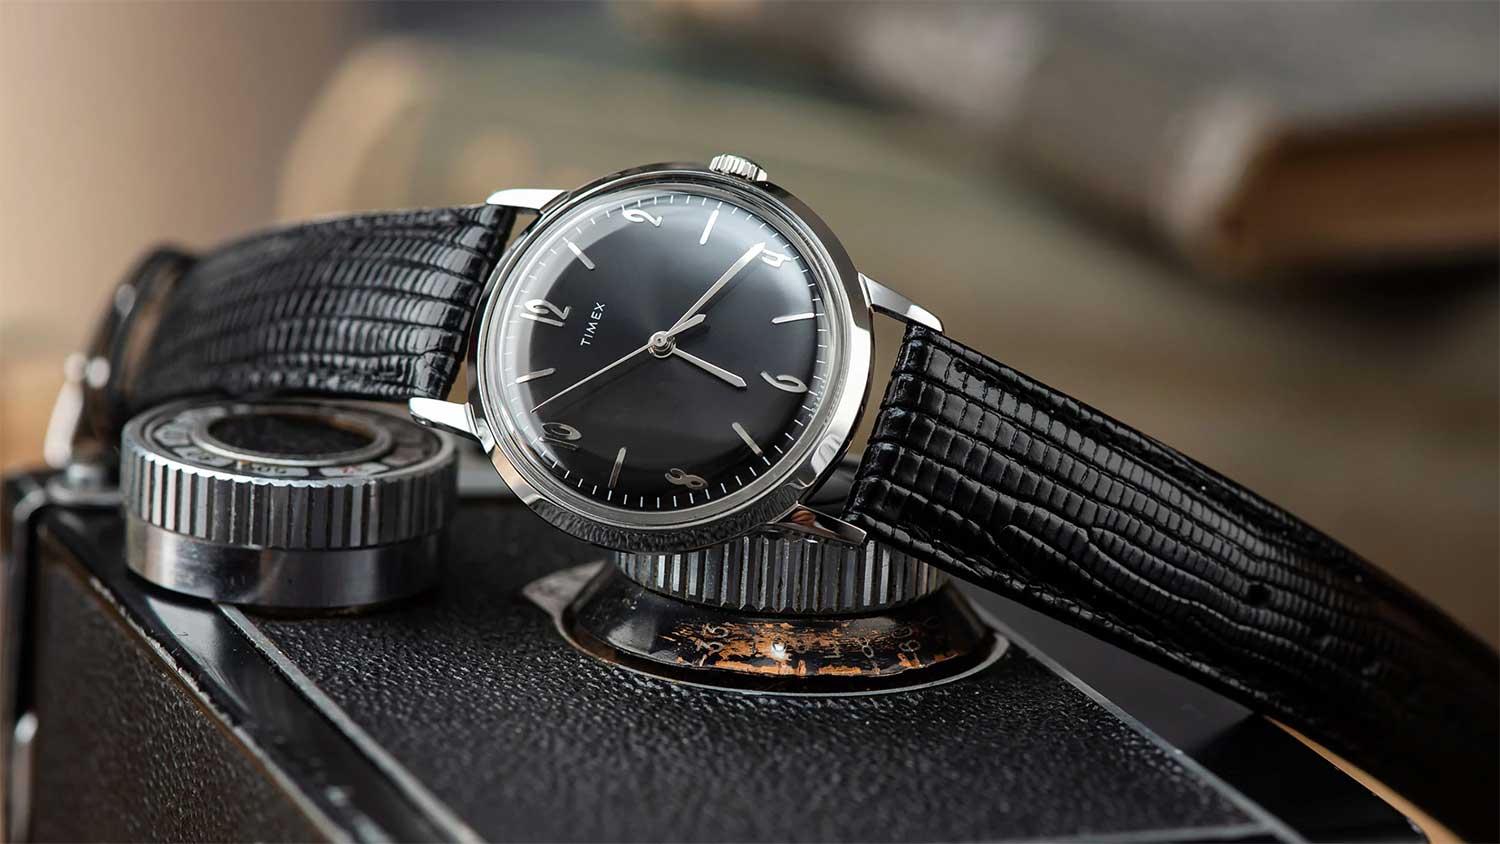 23 Best Mens All Black Watches - The Watch Blog